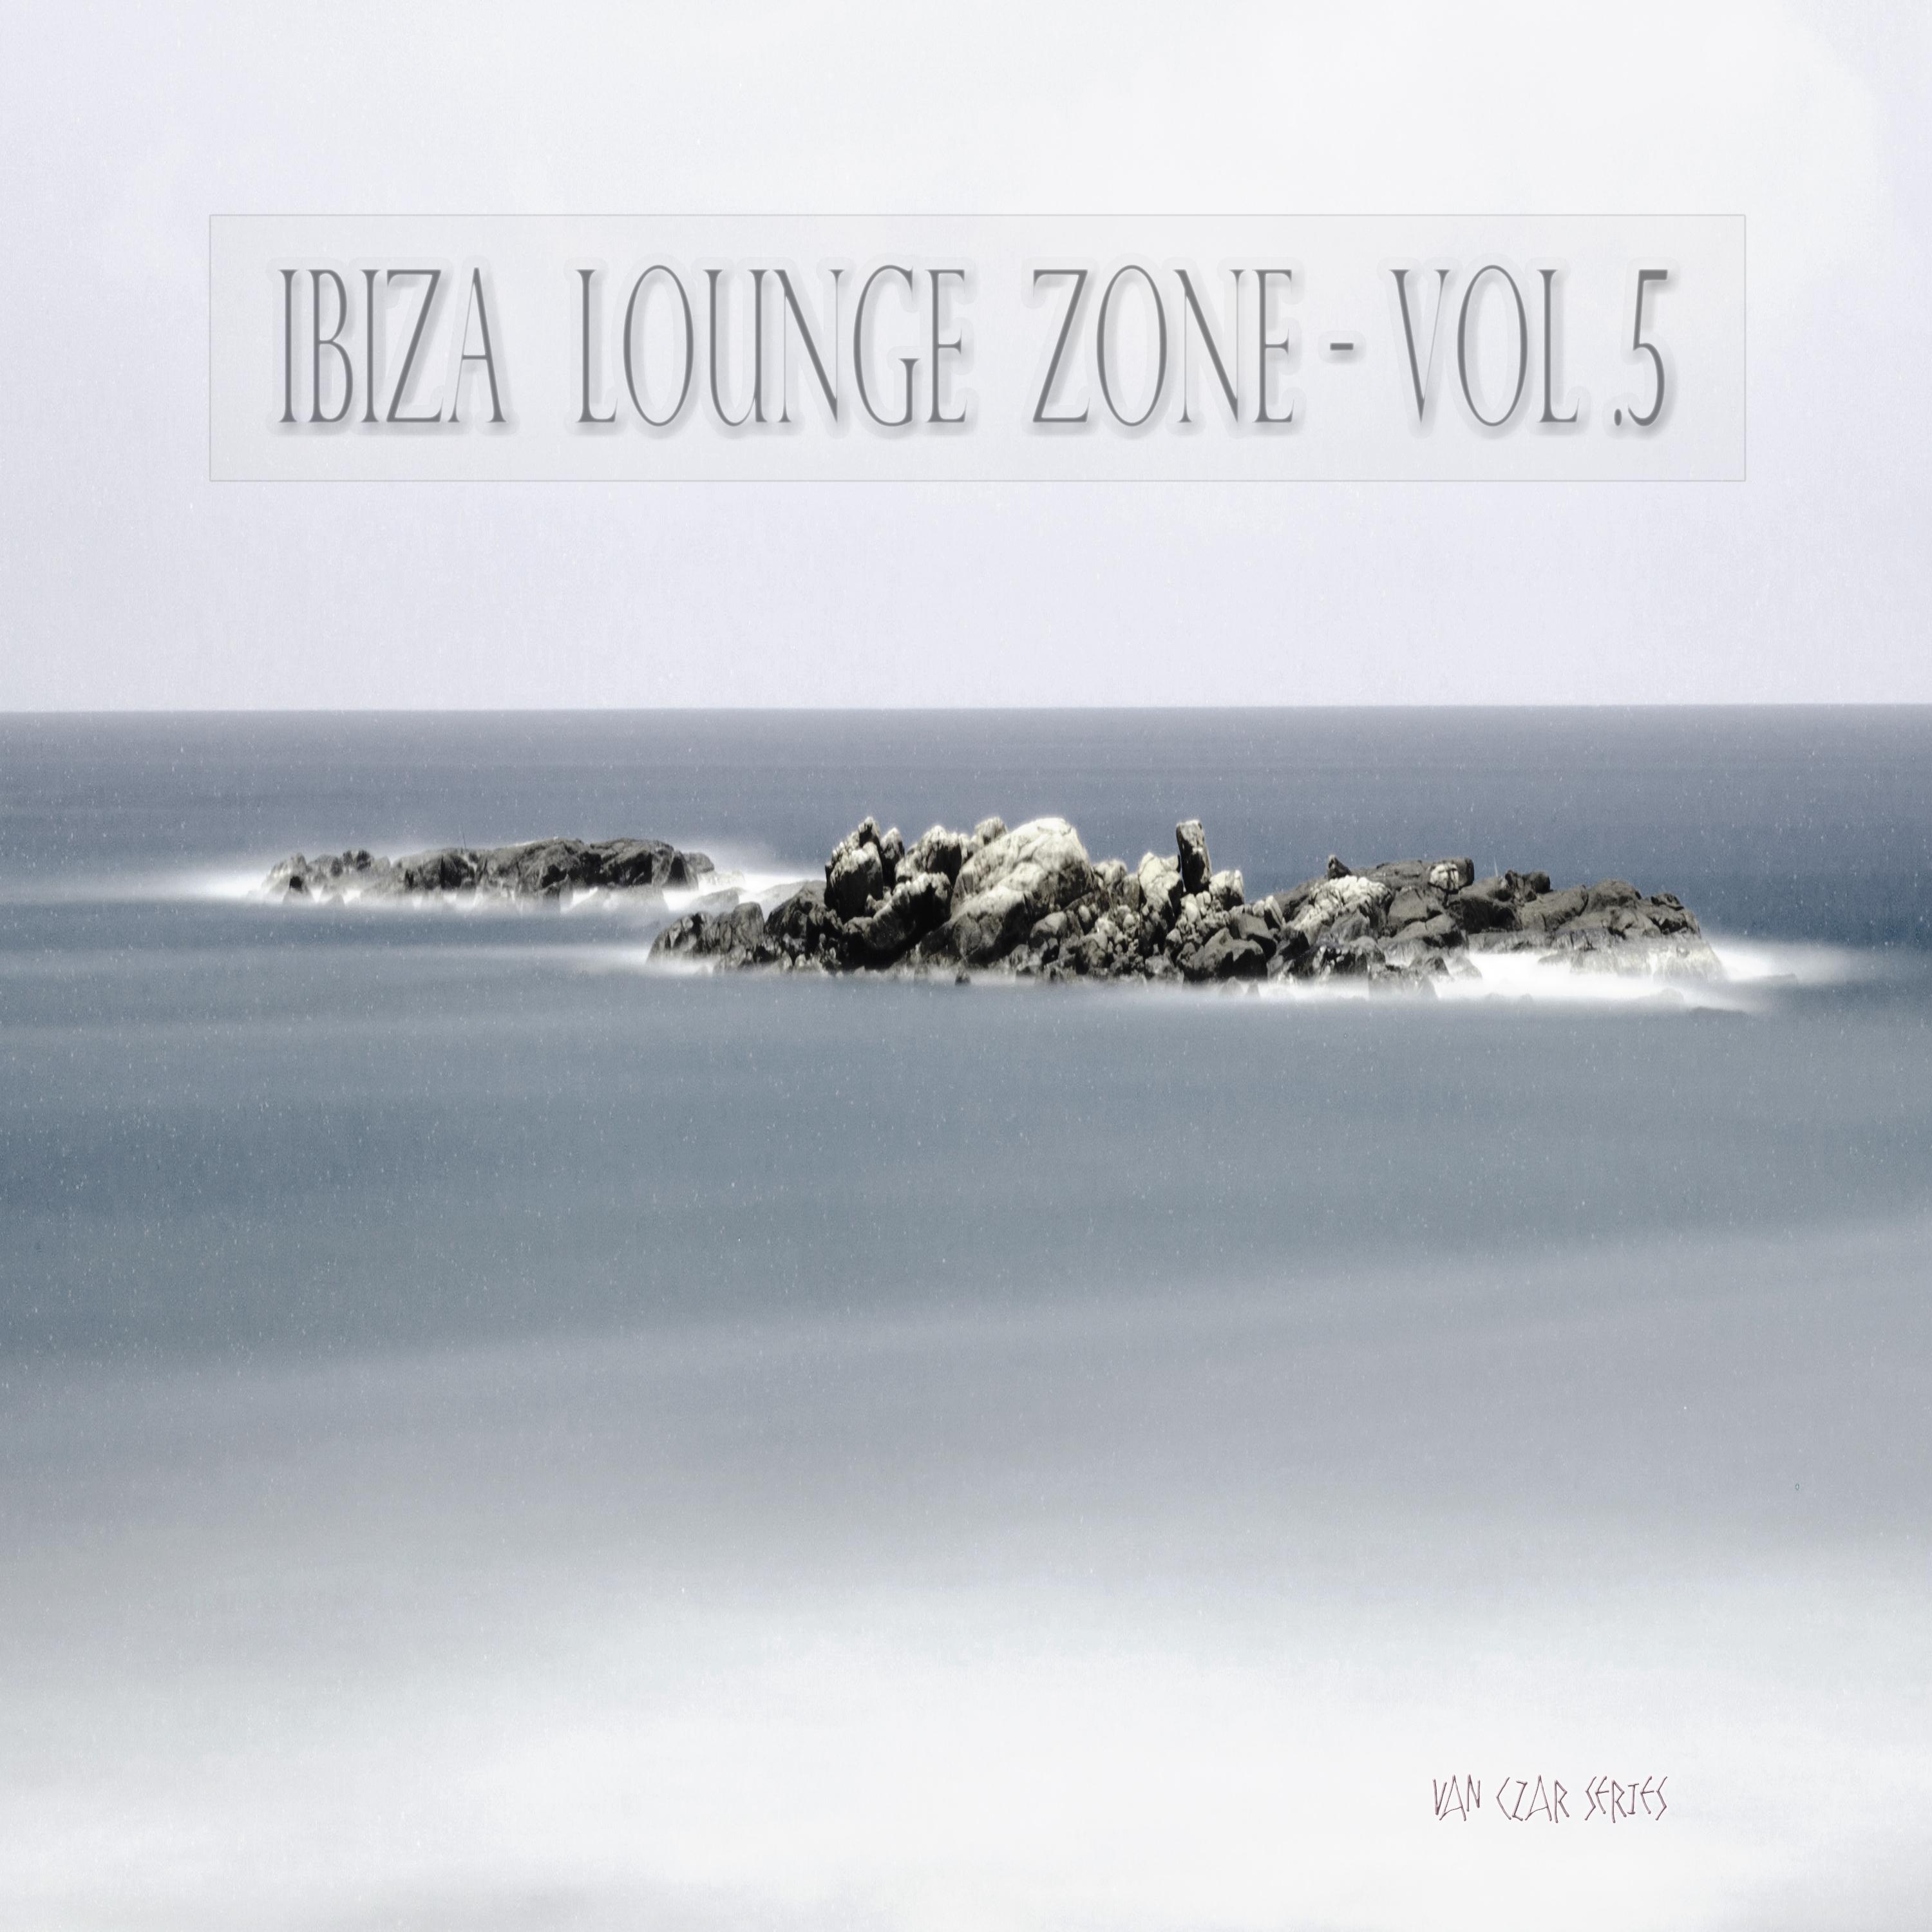 Ibiza Lounge Zone, Vol. 5 (Compiled & Mixed by Van Czar)